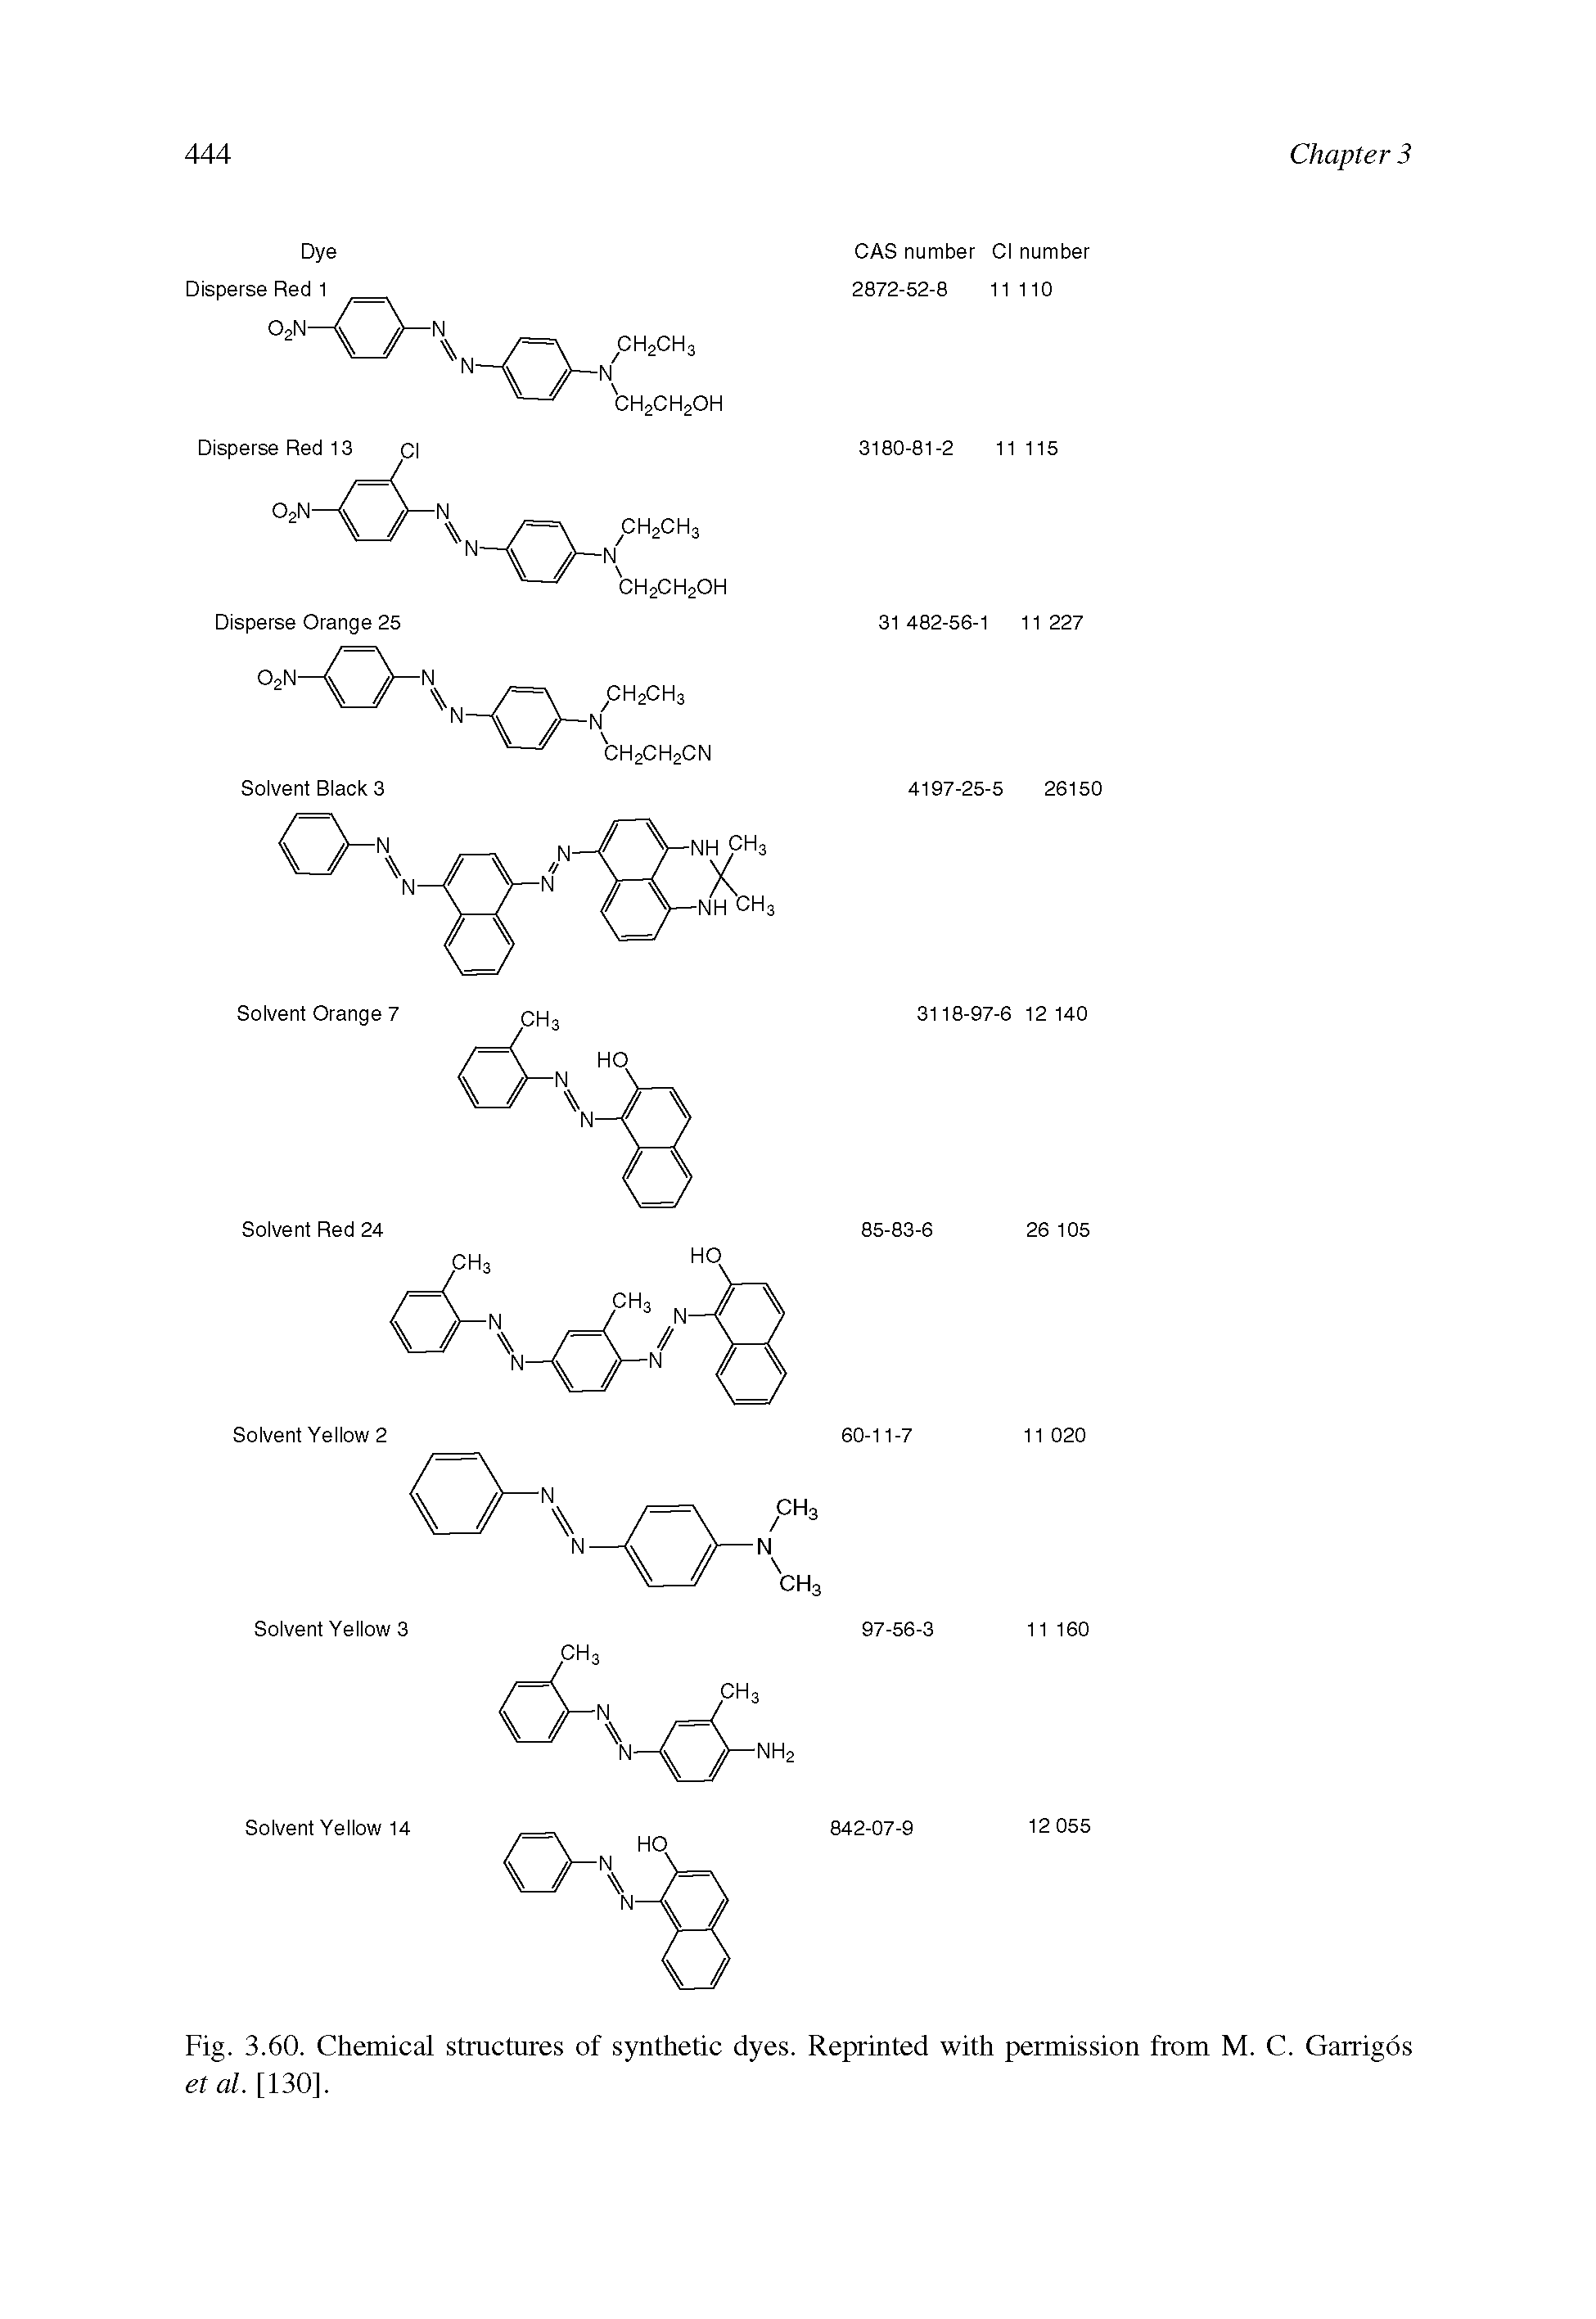 Fig. 3.60. Chemical structures of synthetic dyes. Reprinted with permission from M. C. Garrigos et al. [130].